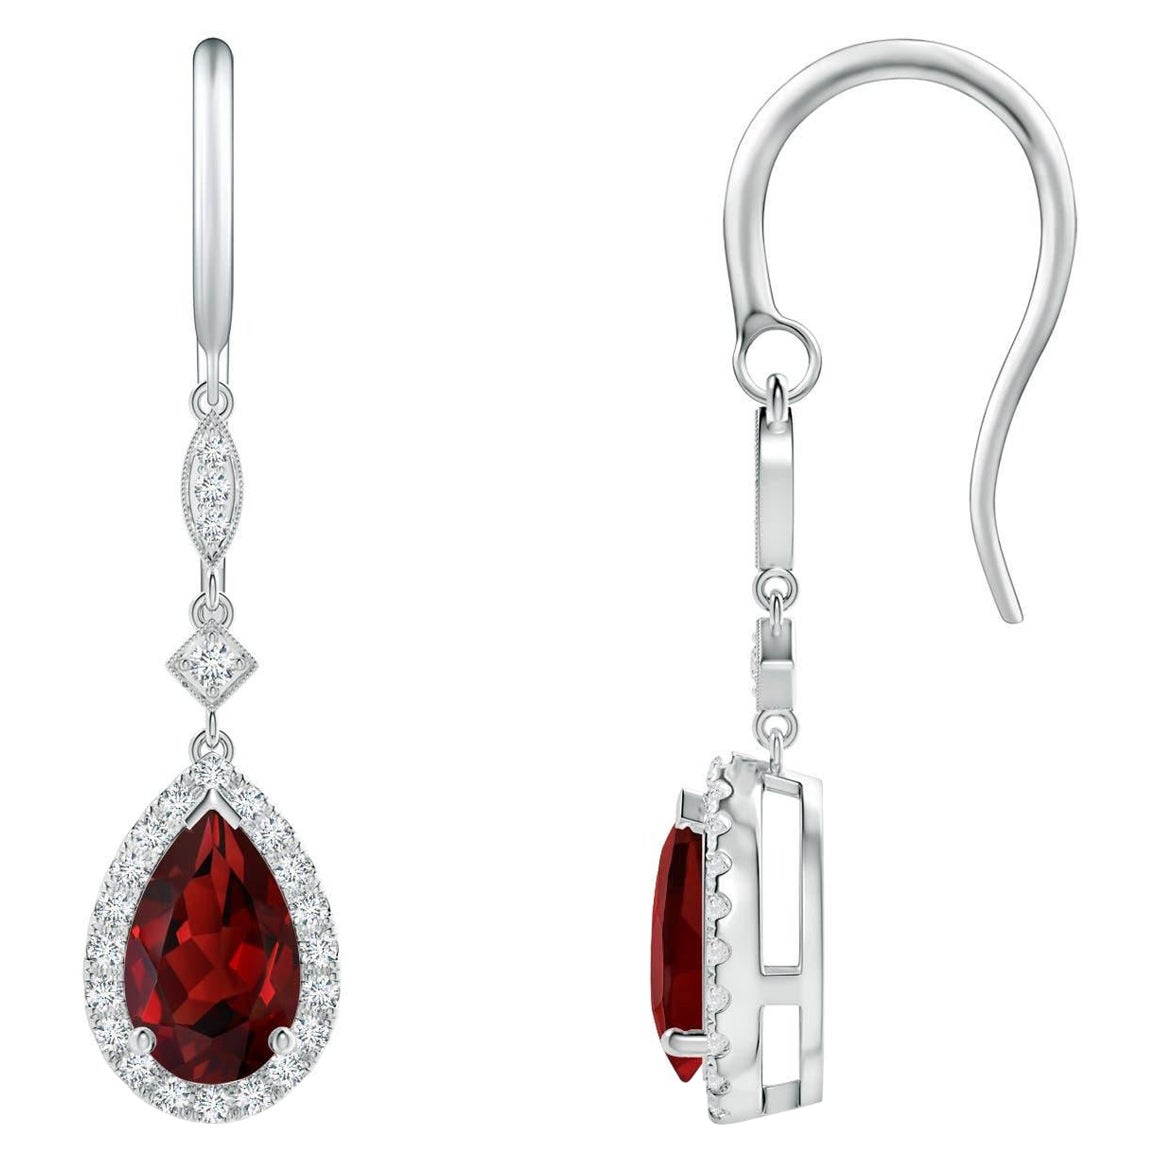 Natural Pear-Shaped 2.4ct Garnet Drop Earrings with Diamond in Platinum